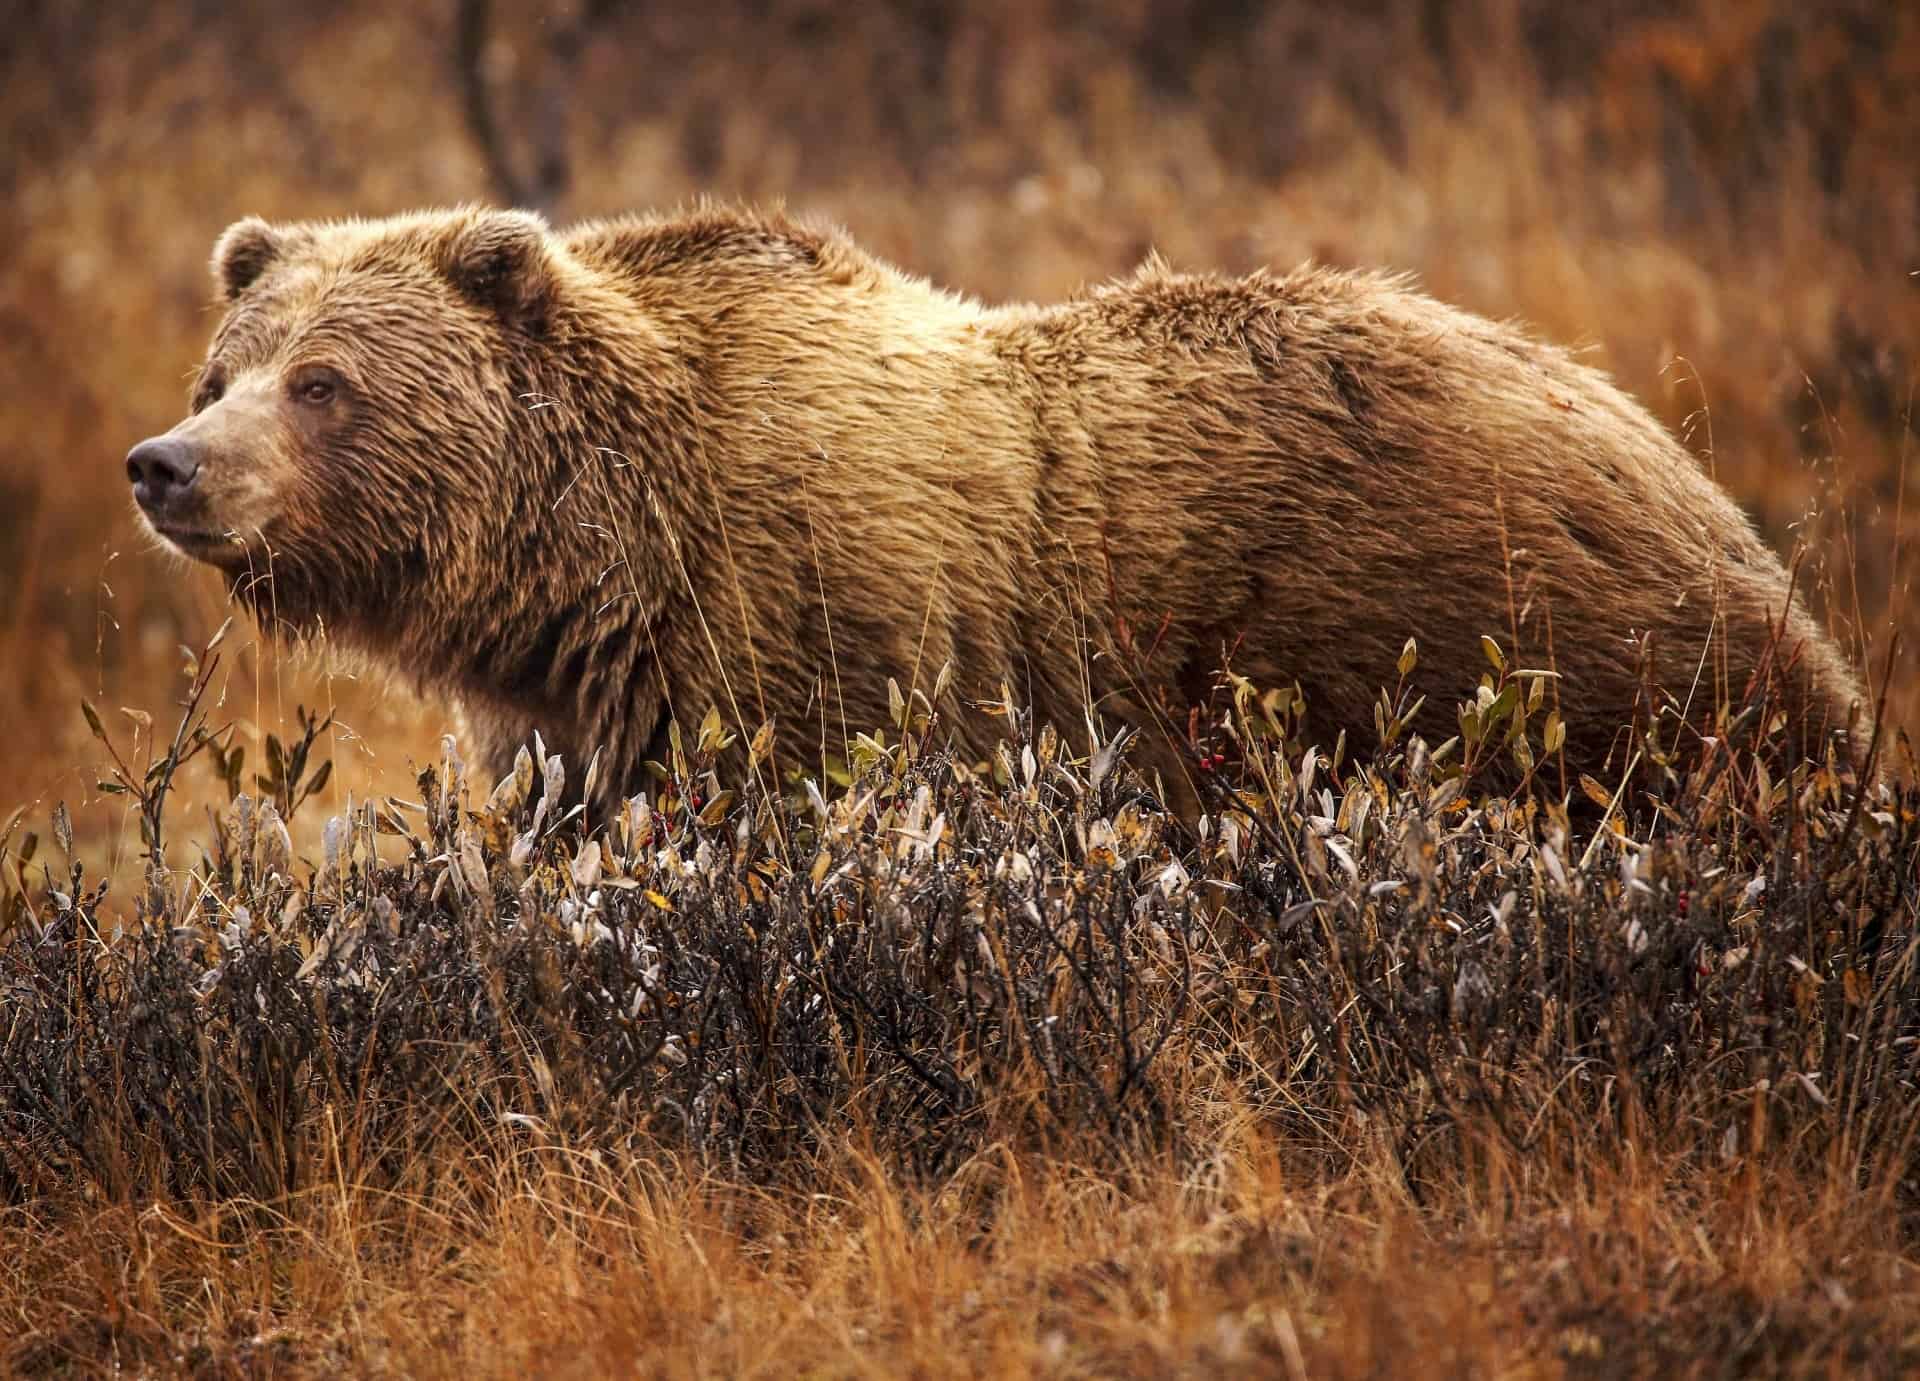 A portrait of a wild grizzly bear.